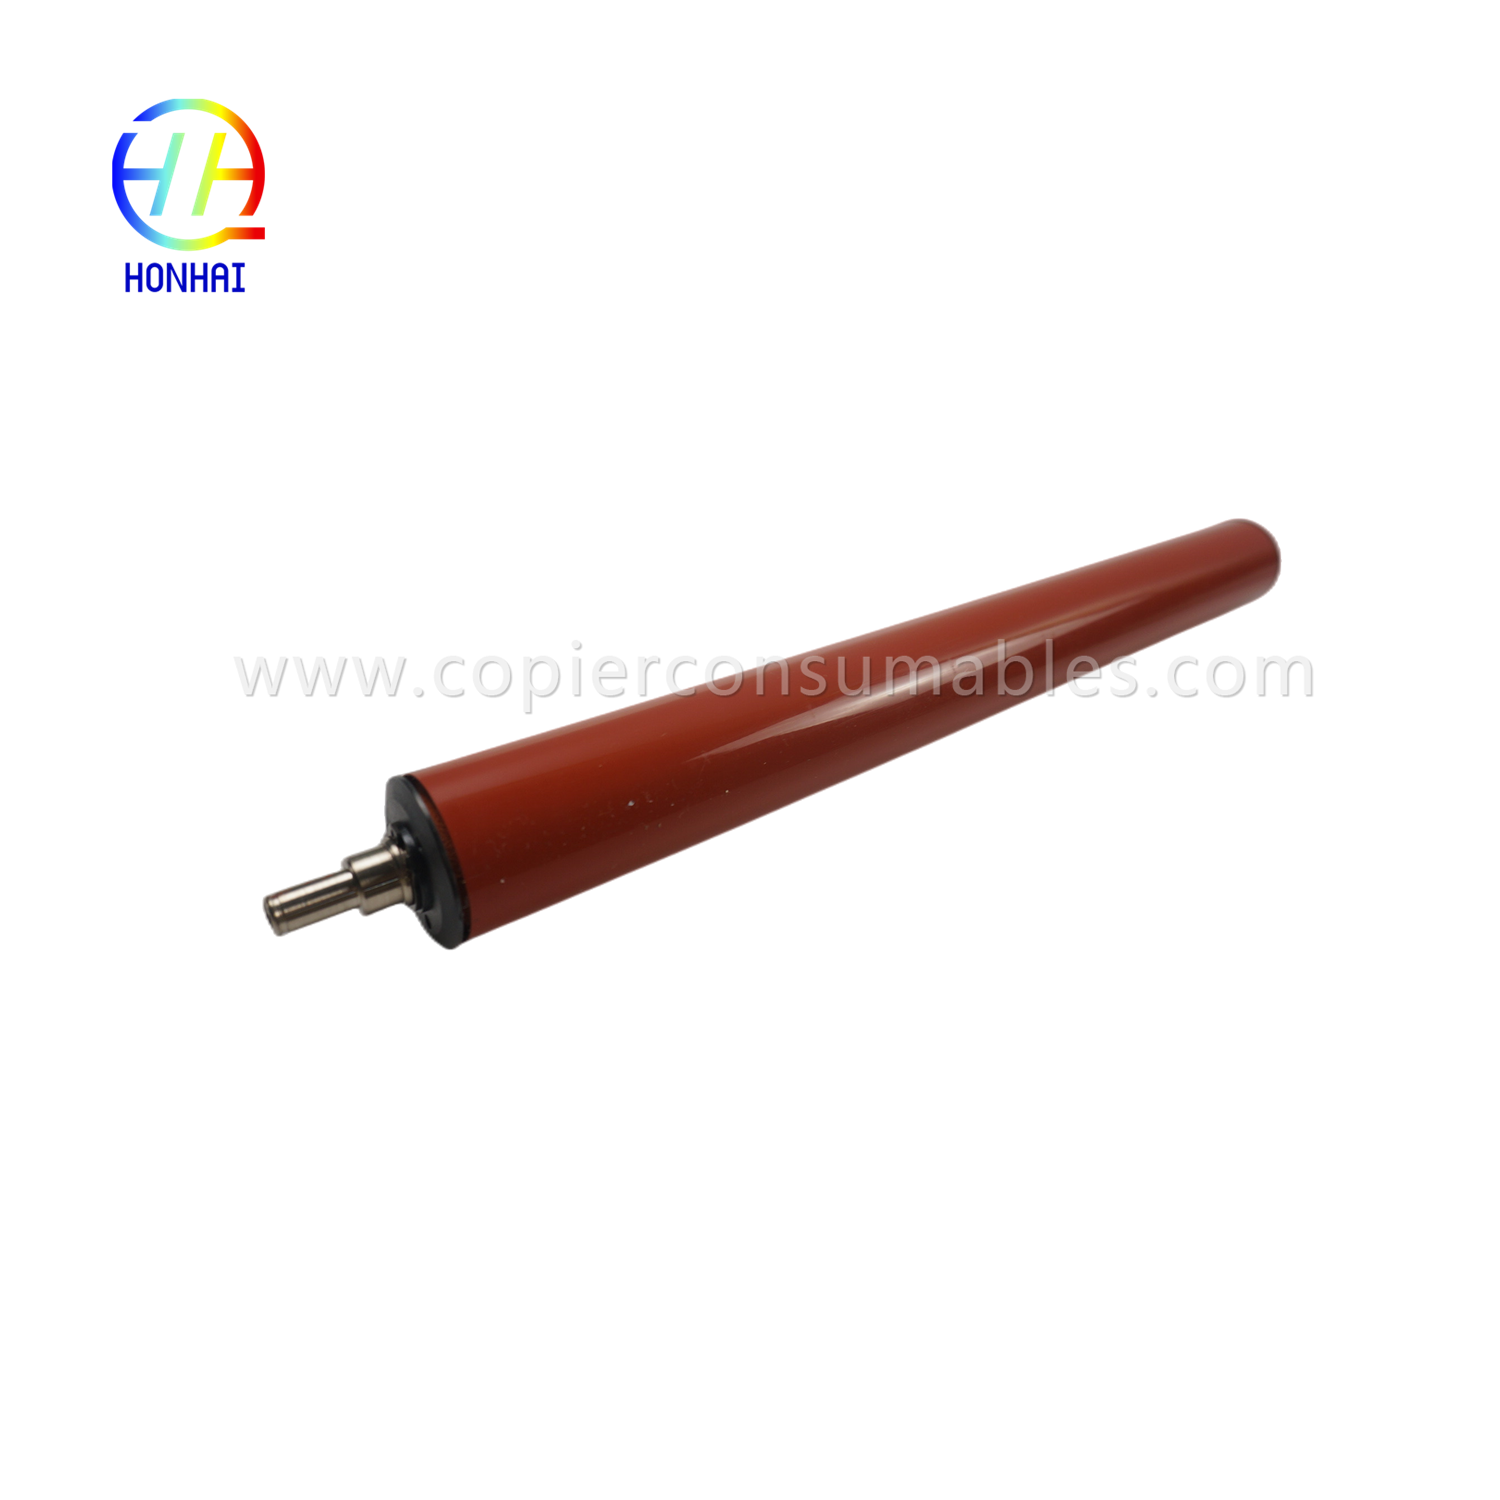 https://www.copierconsumables.com/upper-fuser-roller-for-ricoh-mpc3001-3501-product/